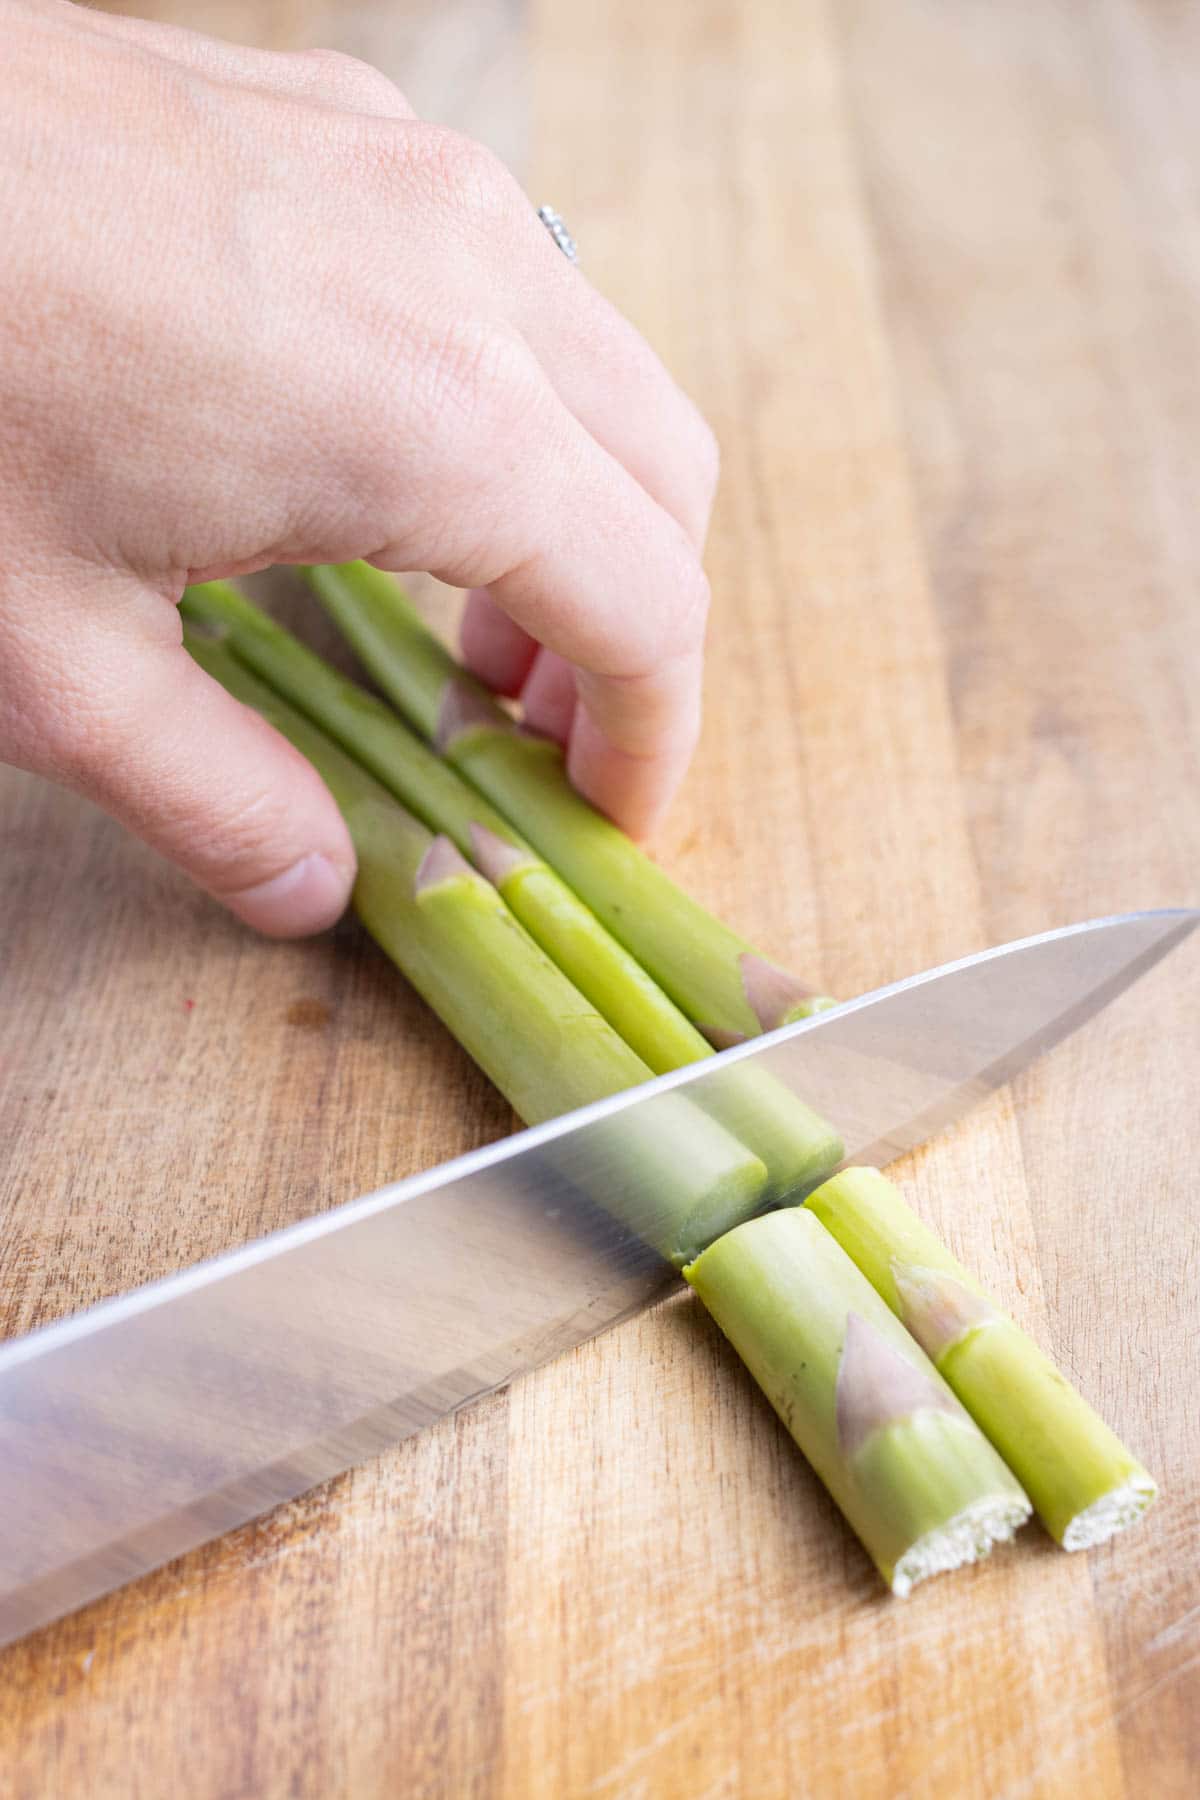 A knife is used to cut the ends of the raw asparagus.